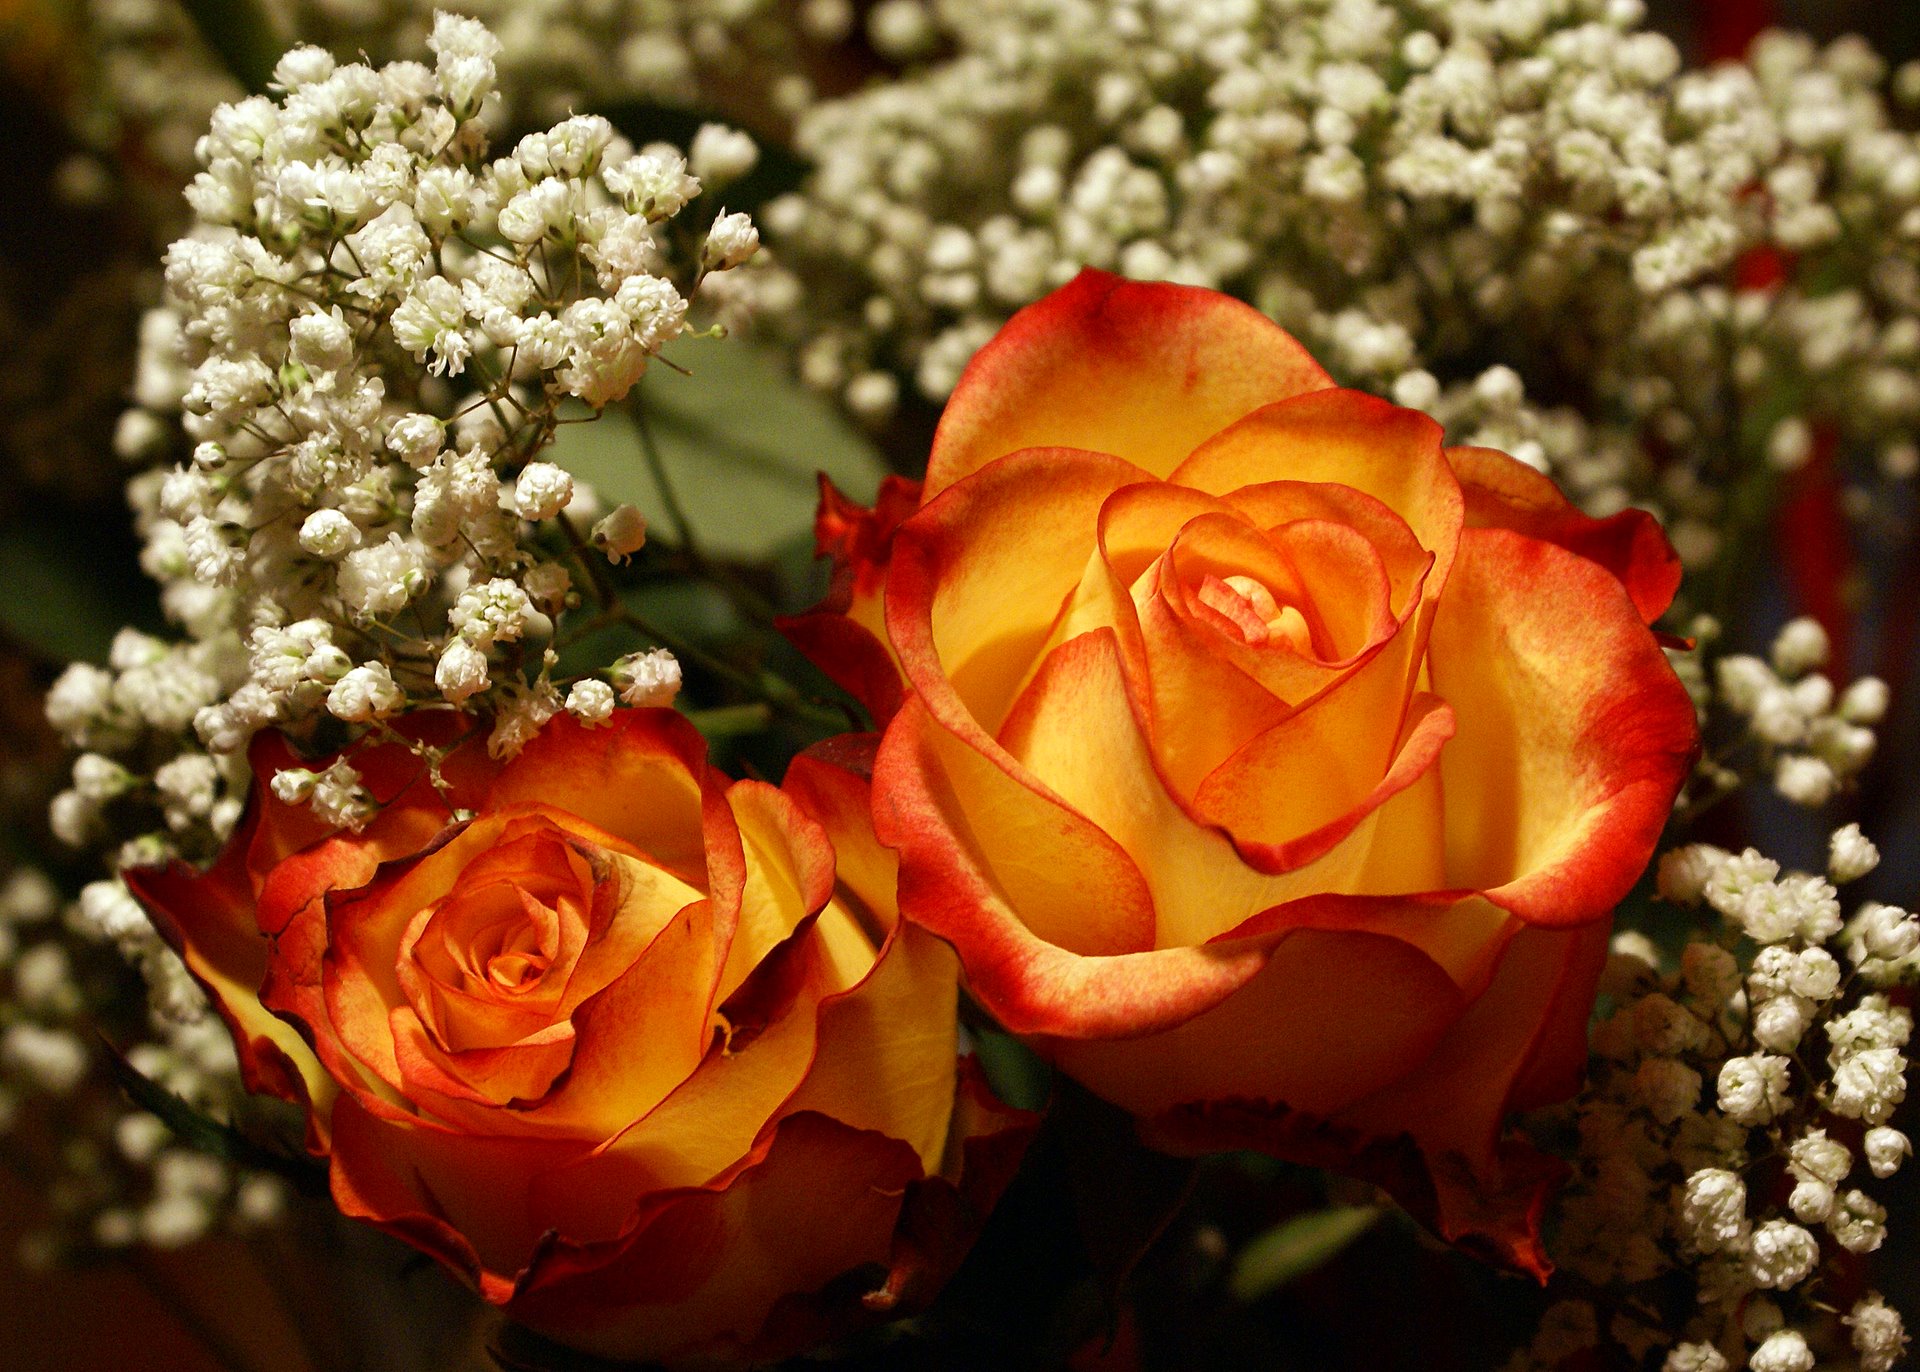 most-beautiful-red-yellow-rose-bouquet.jpg